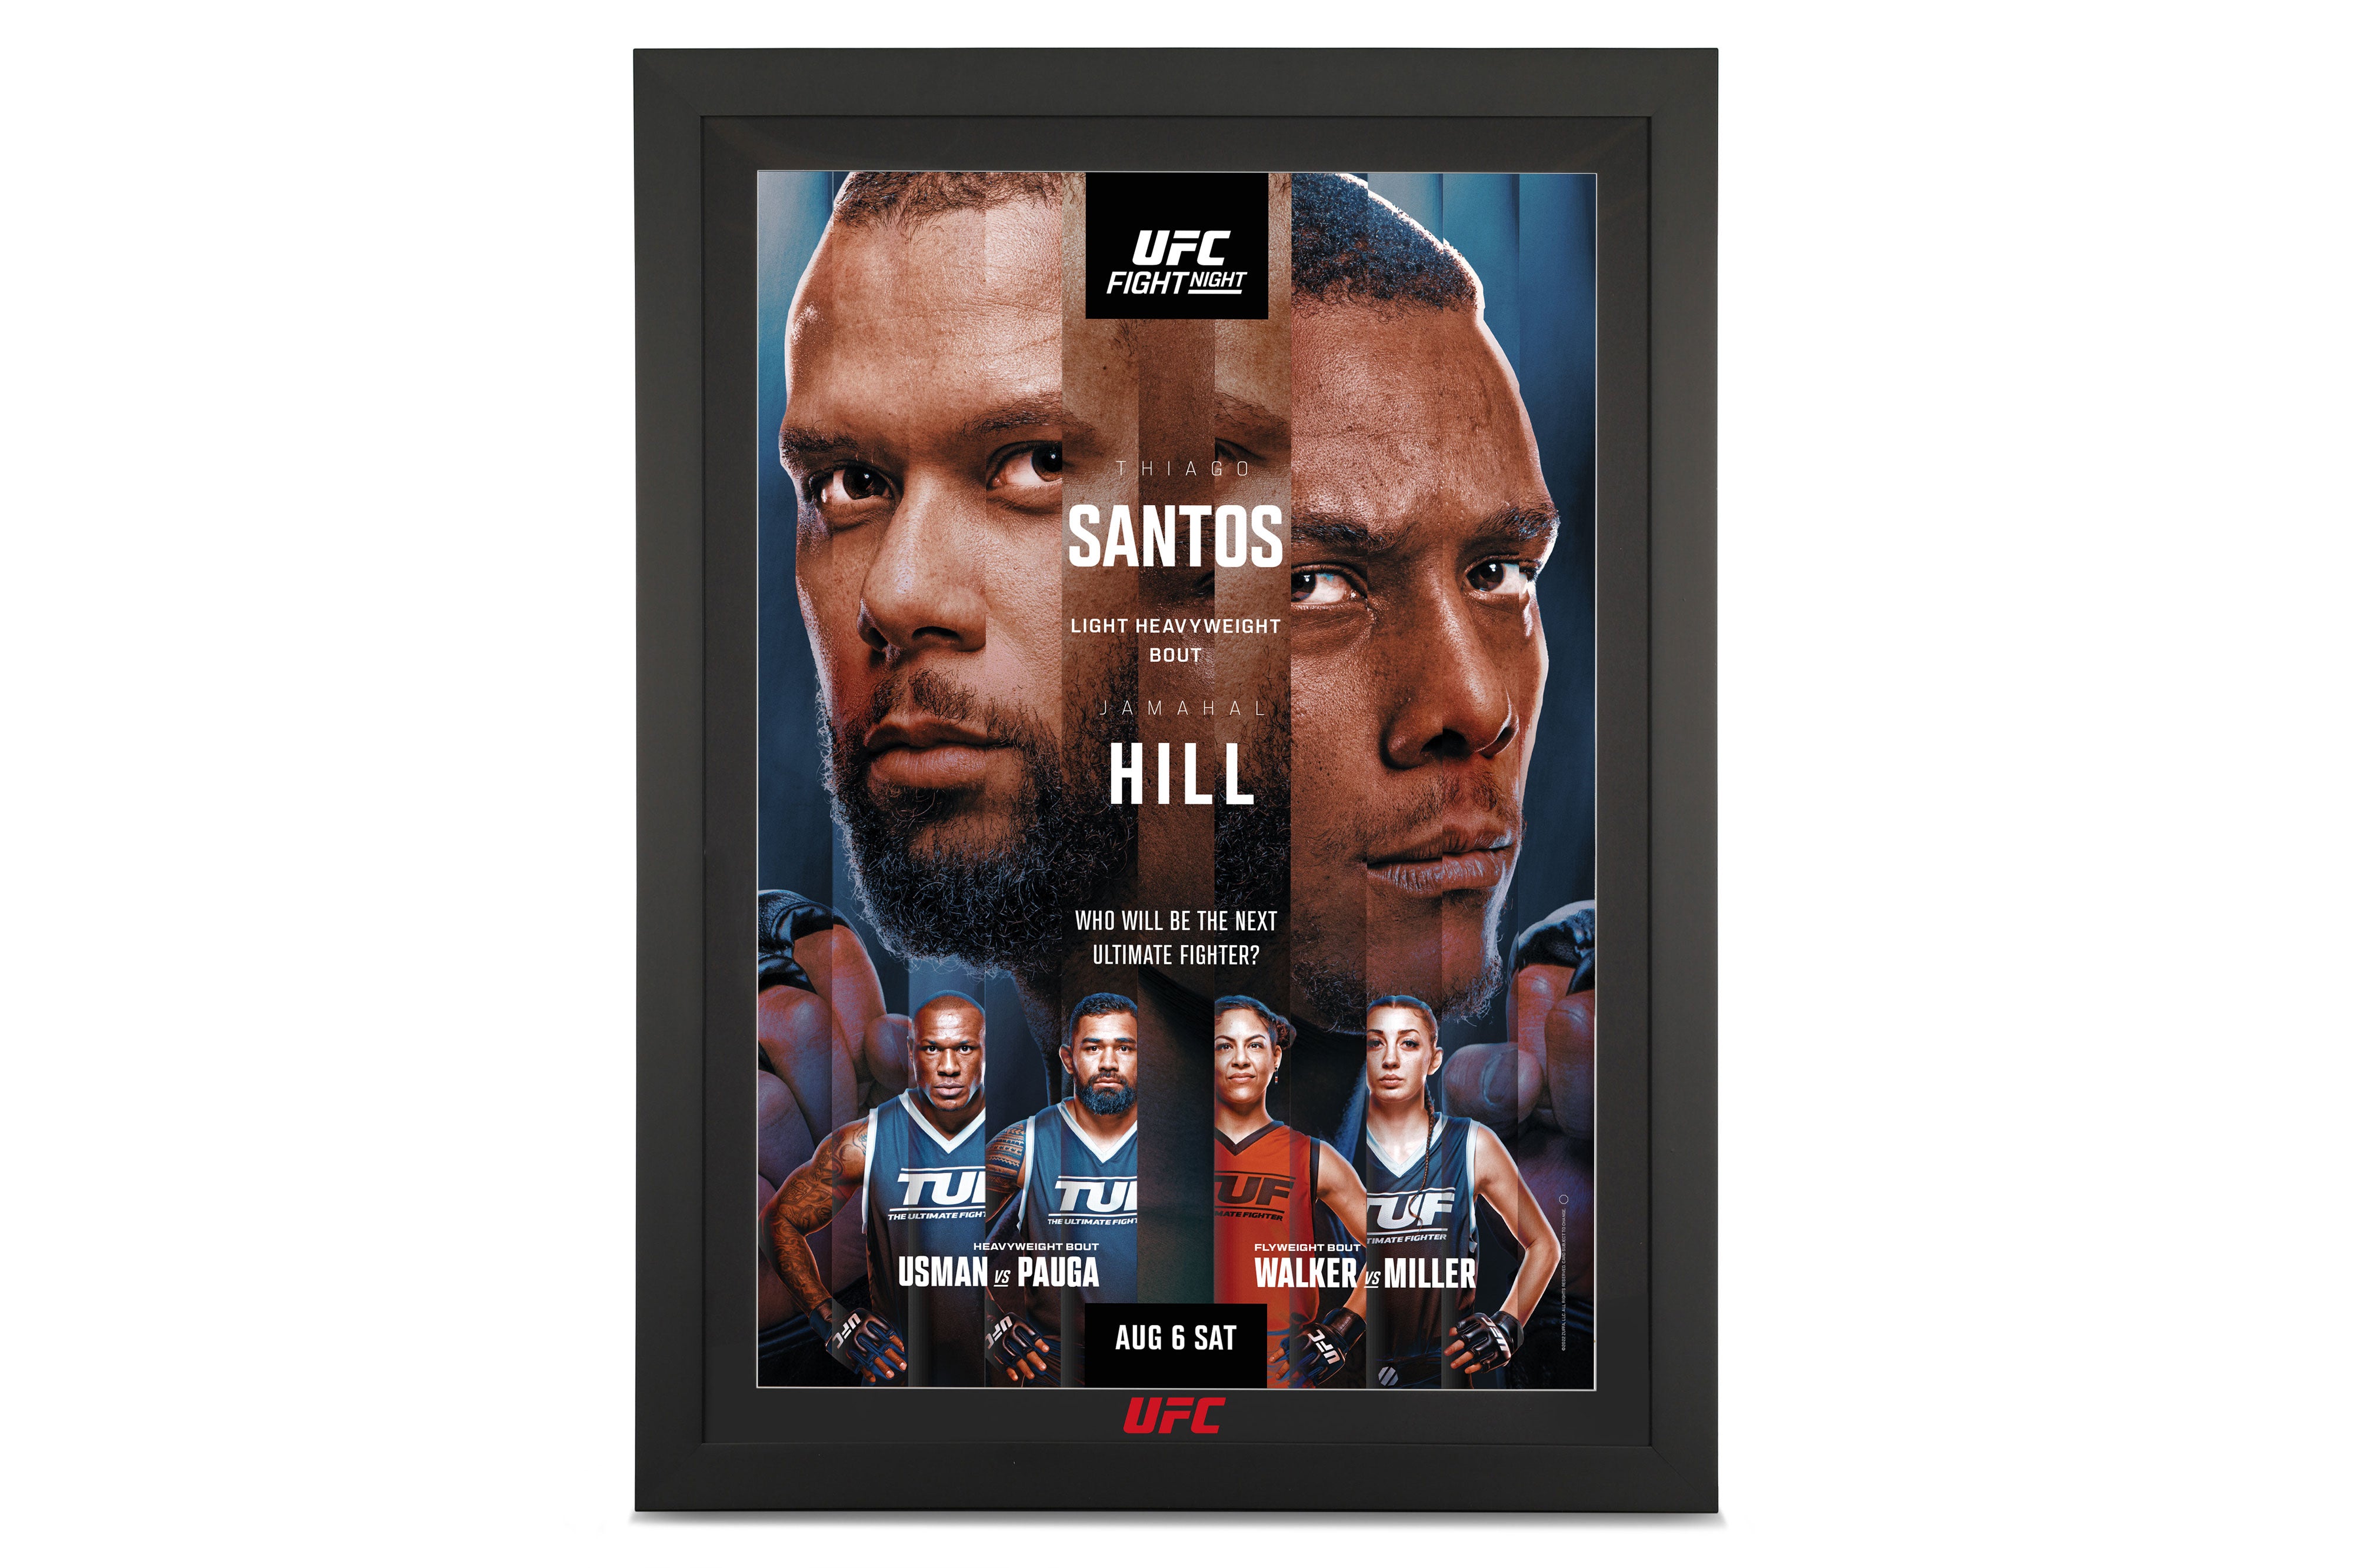 Authentic signed event poster from UFC Fight Night